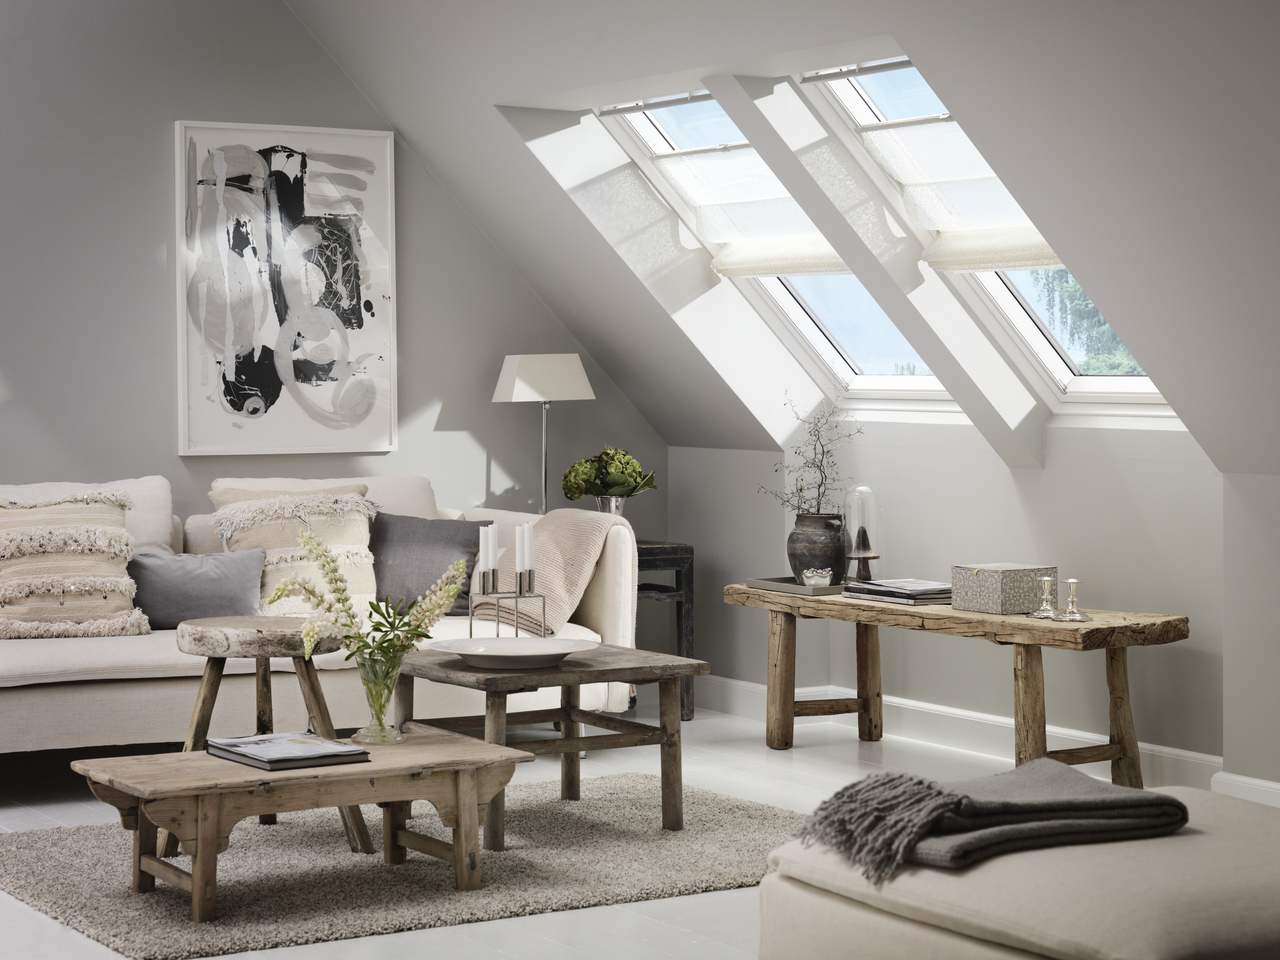 Le nuove tende a pacchetto velux for Velux sottotetto